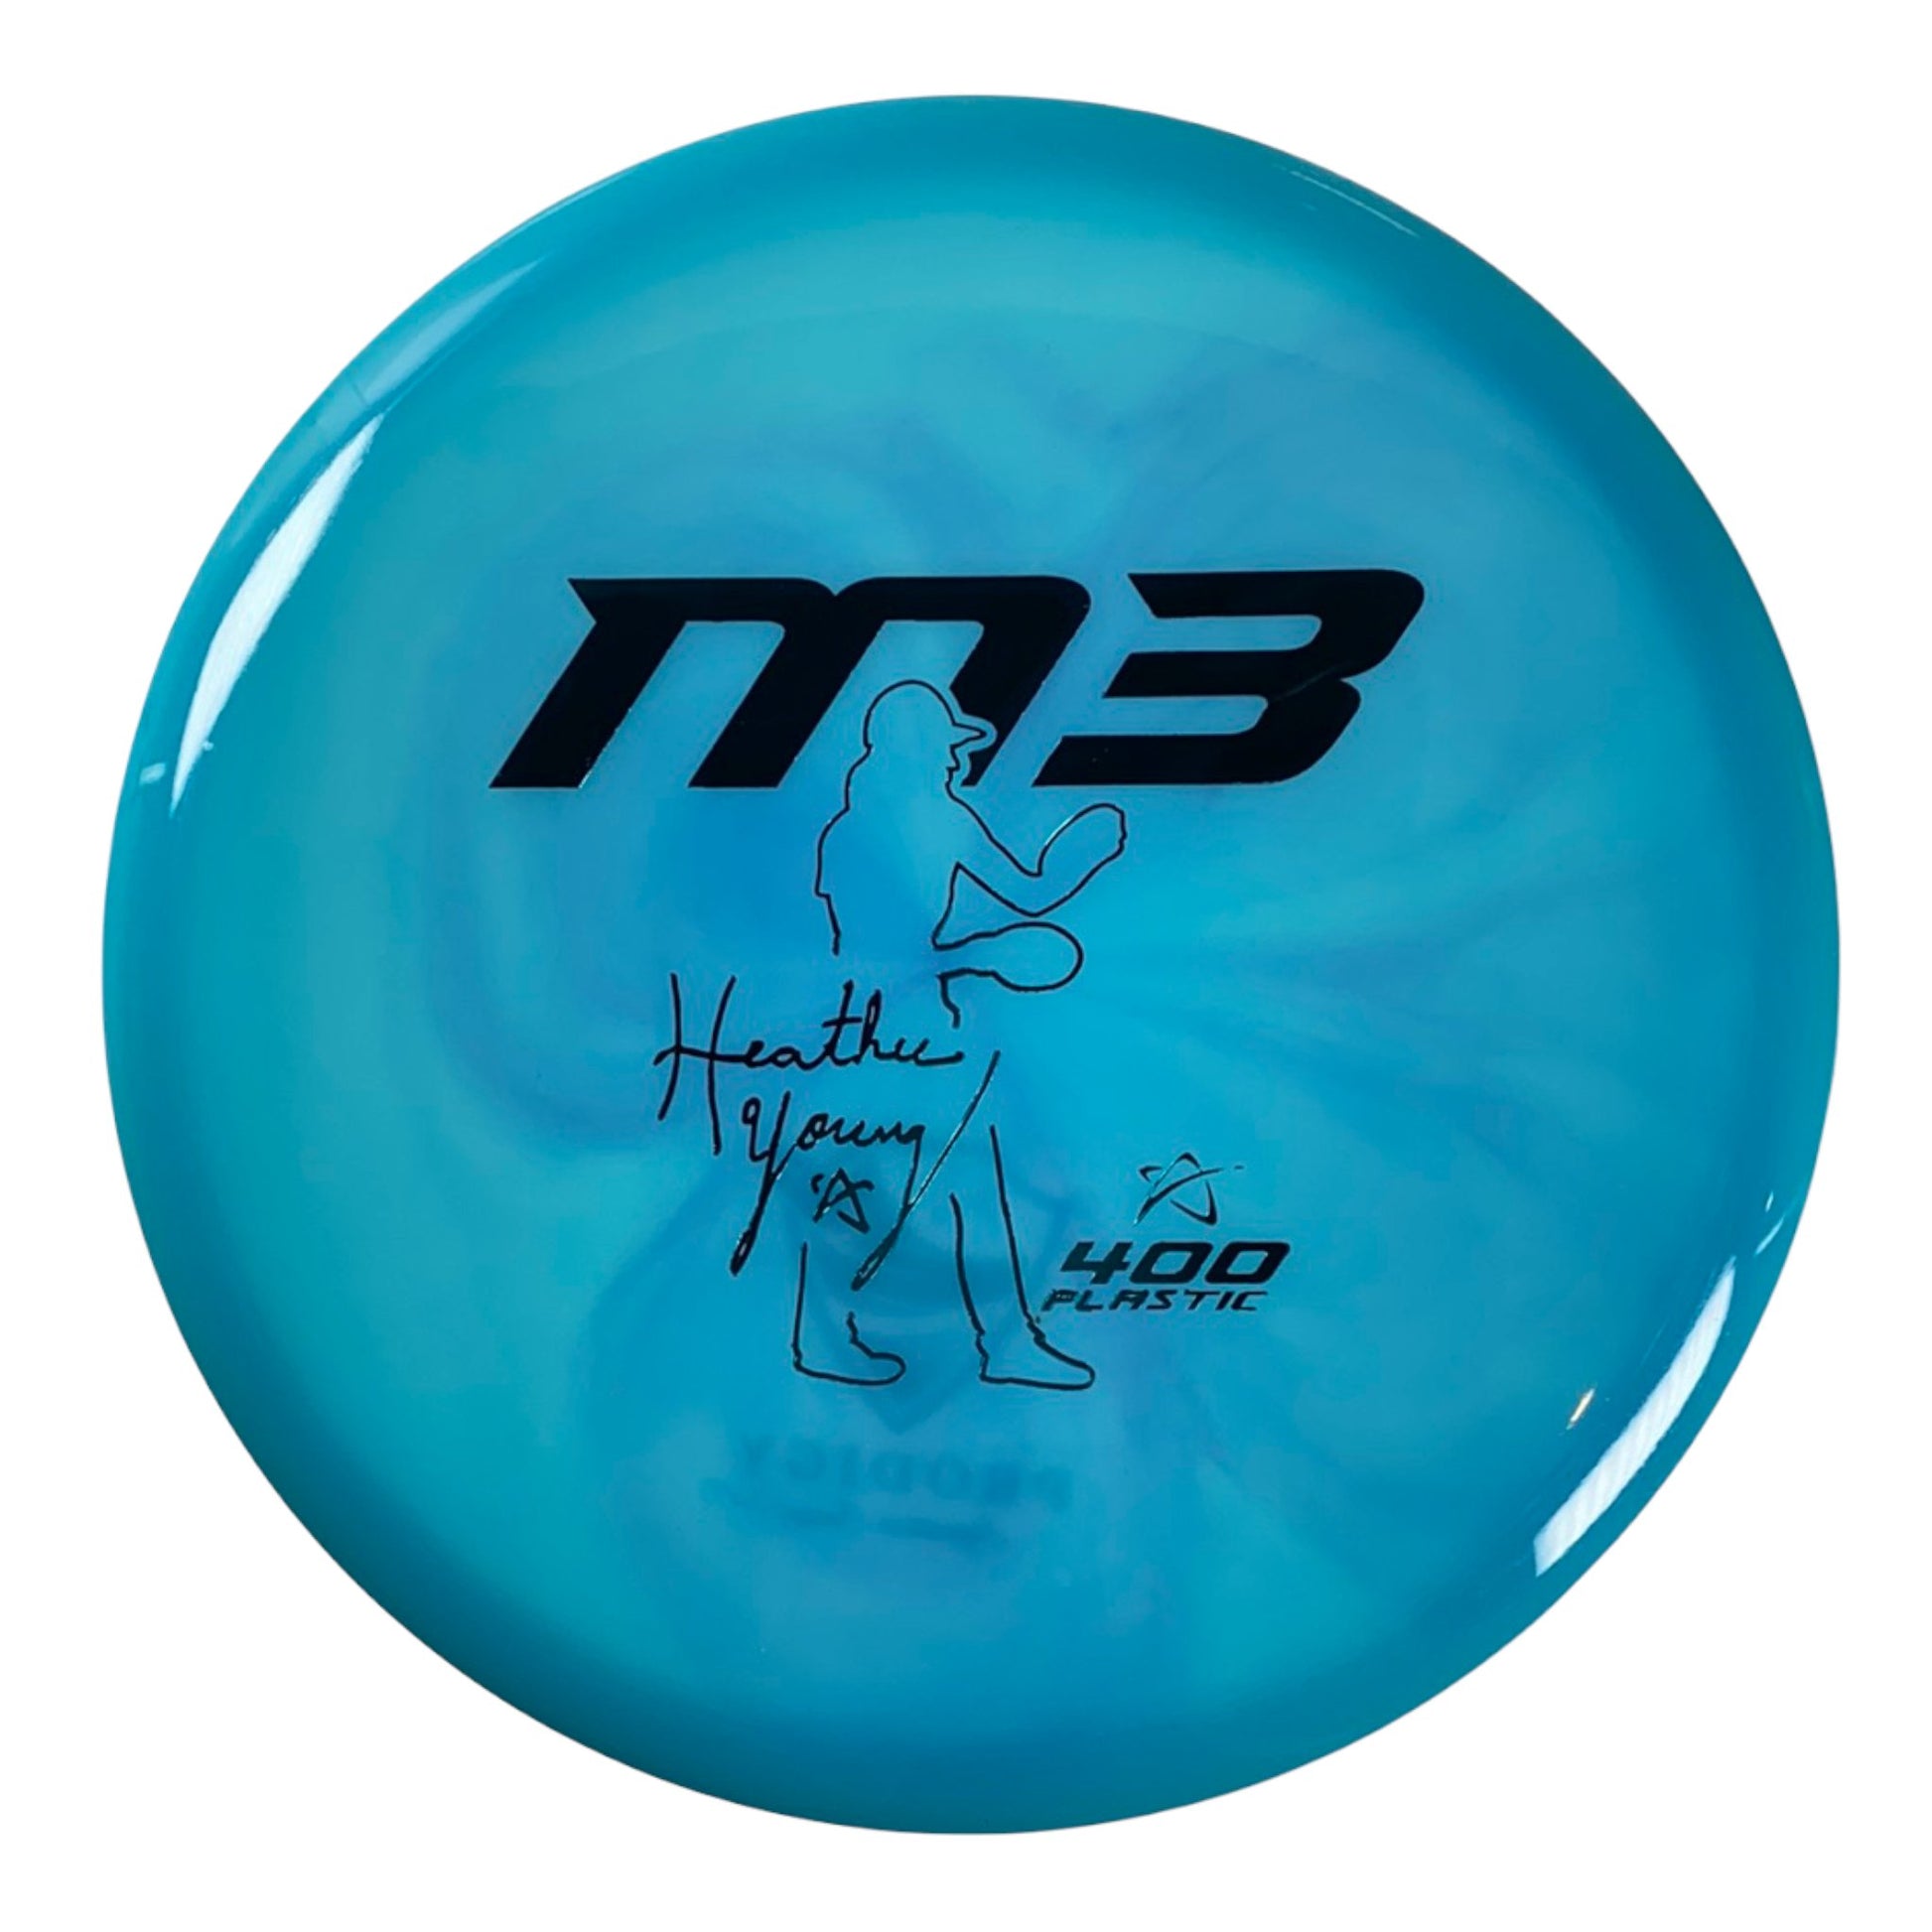 Prodigy Disc M3 | 400 | Blue/Teal 178-180g (Heather Young) Disc Golf